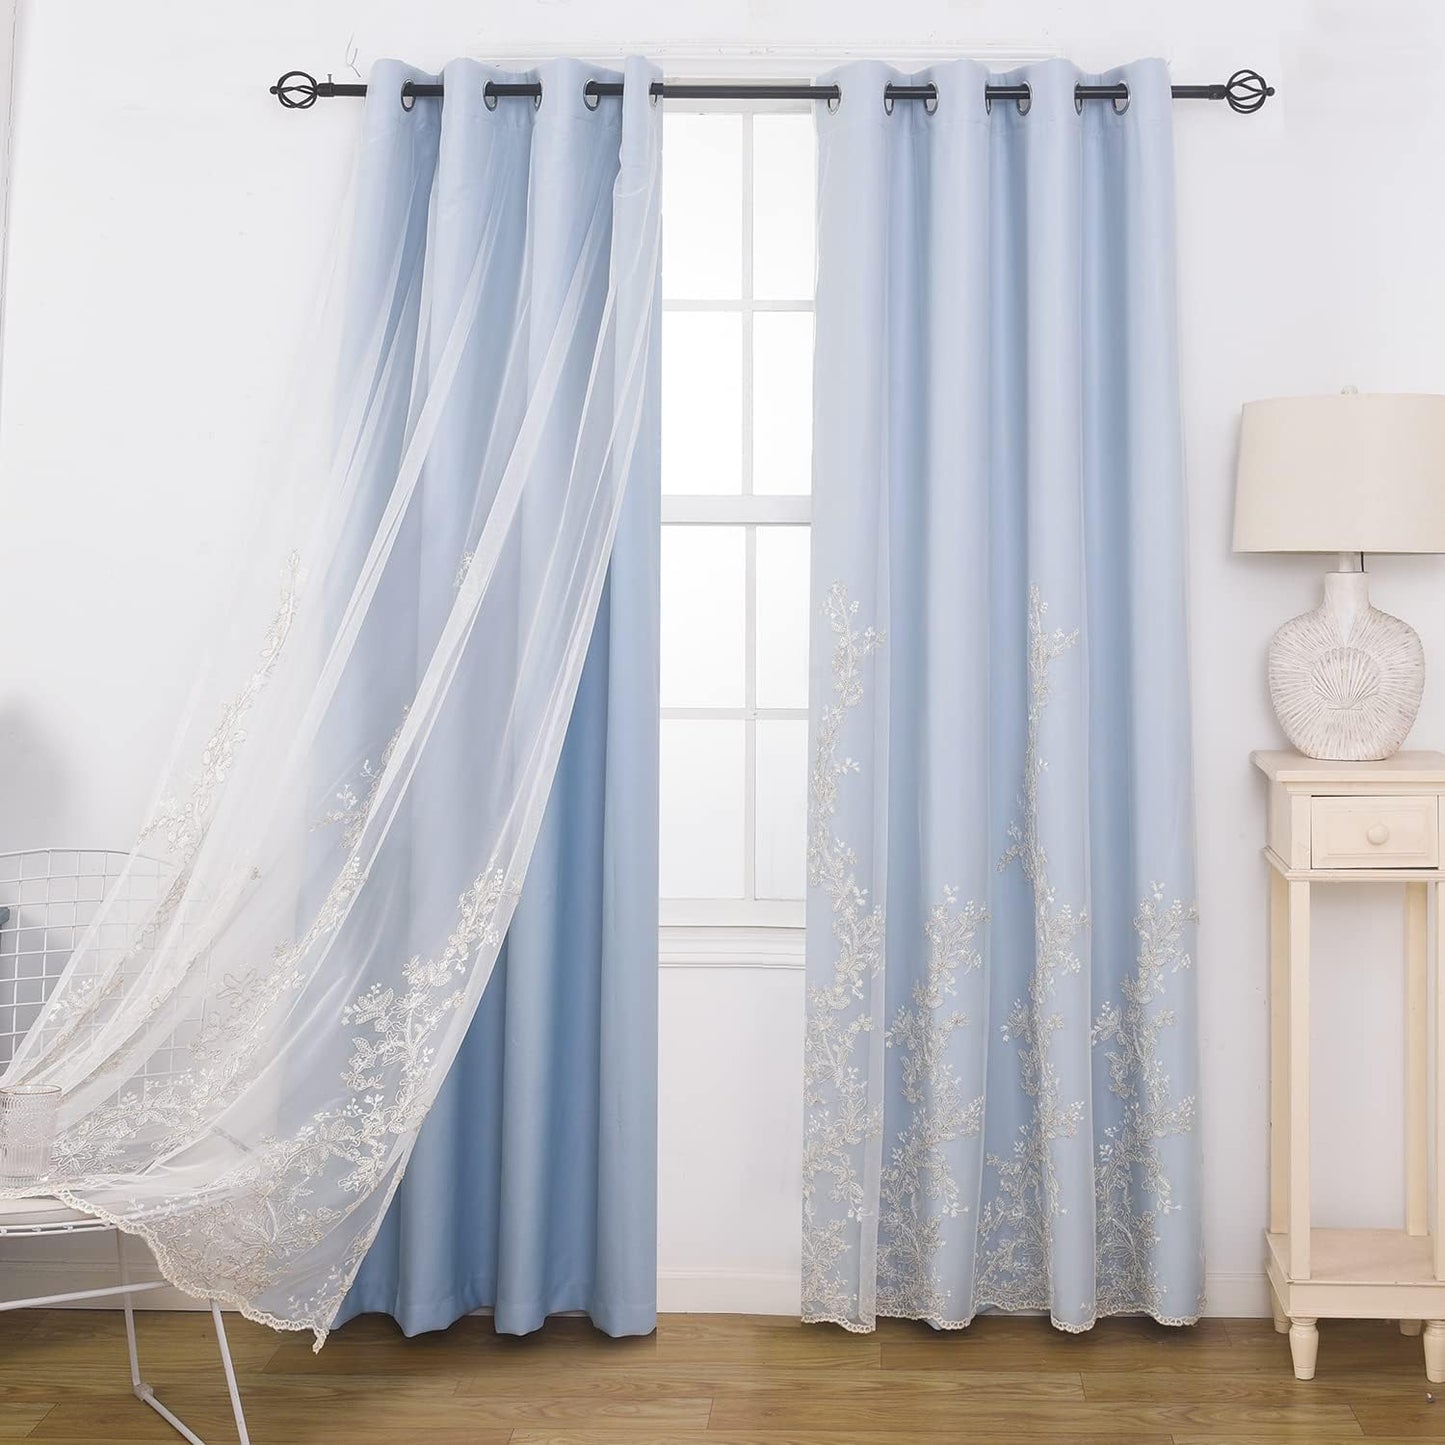 GYROHOME Double Layered Curtains with Embroidered White Sheer Tulle, Mix and Match Curtains Room Darkening Grommet Top Thermal Insulated Drapes,2Panels,52X84Inch,Beige  GYROHOME Sky Blue 52Wx63Lx2 